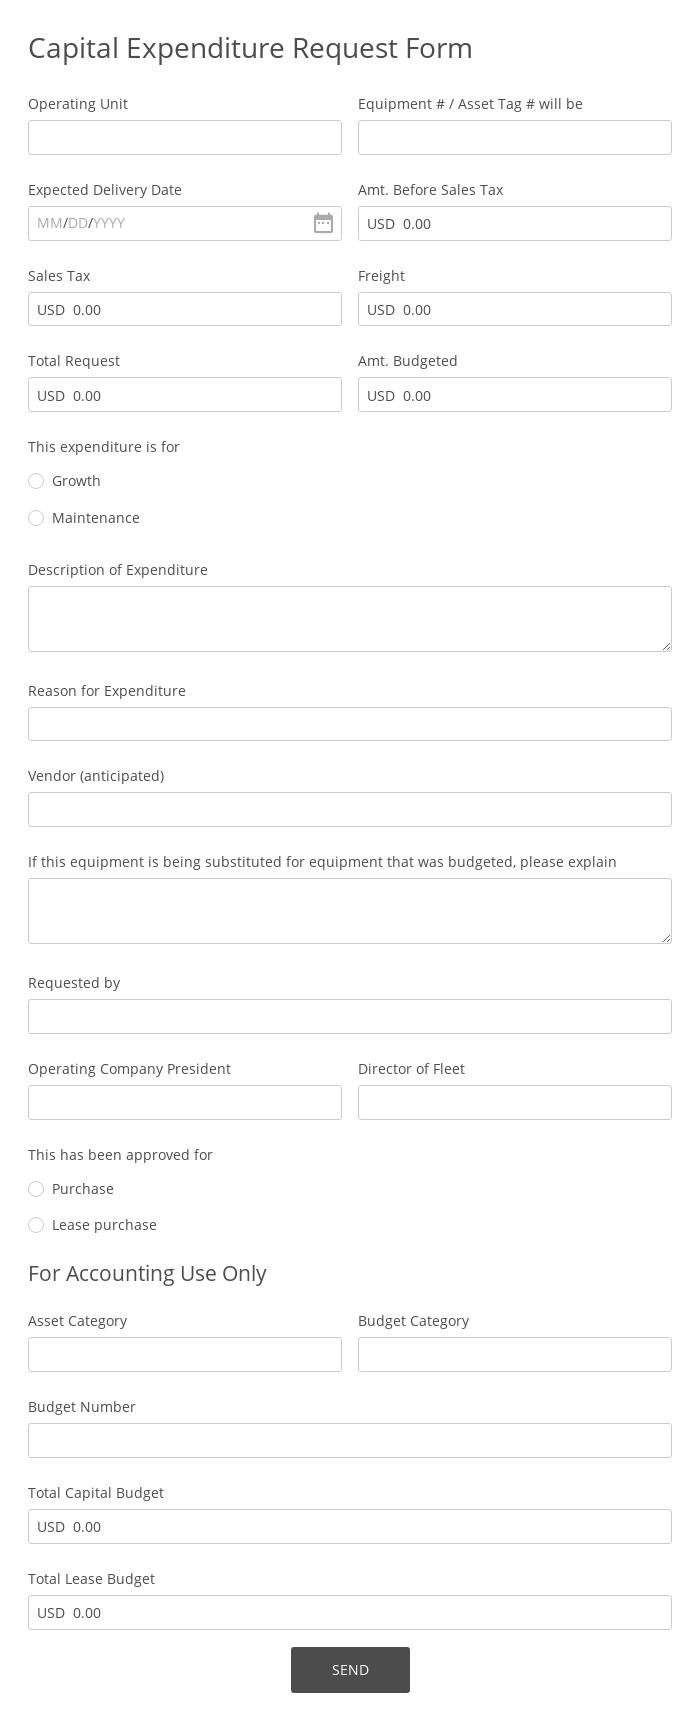 Capital Expenditure Request Form